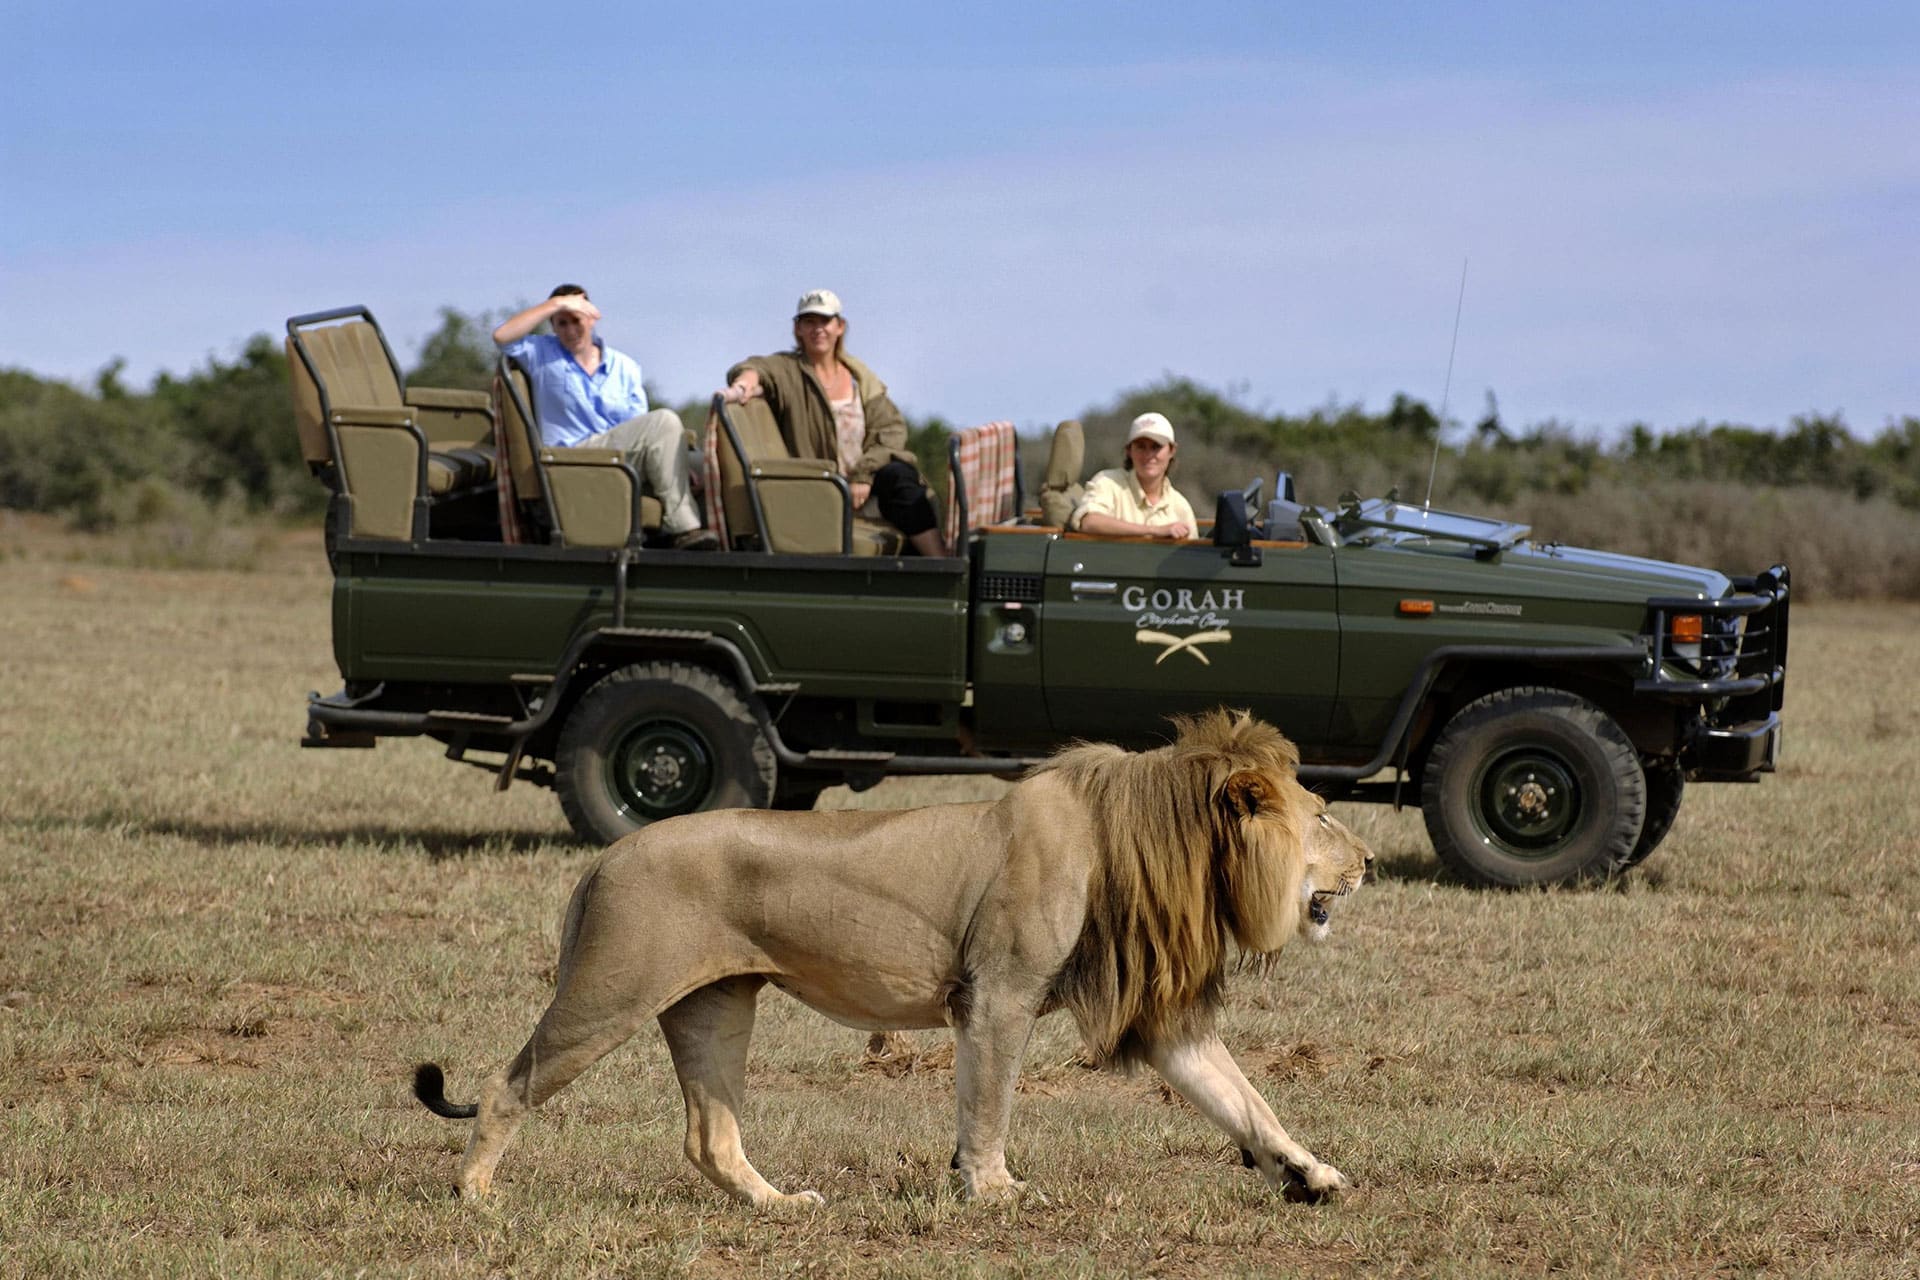 Guided game drive at Gorah Elephant Park - one of the lodges that has a malaria-free safari in south africa